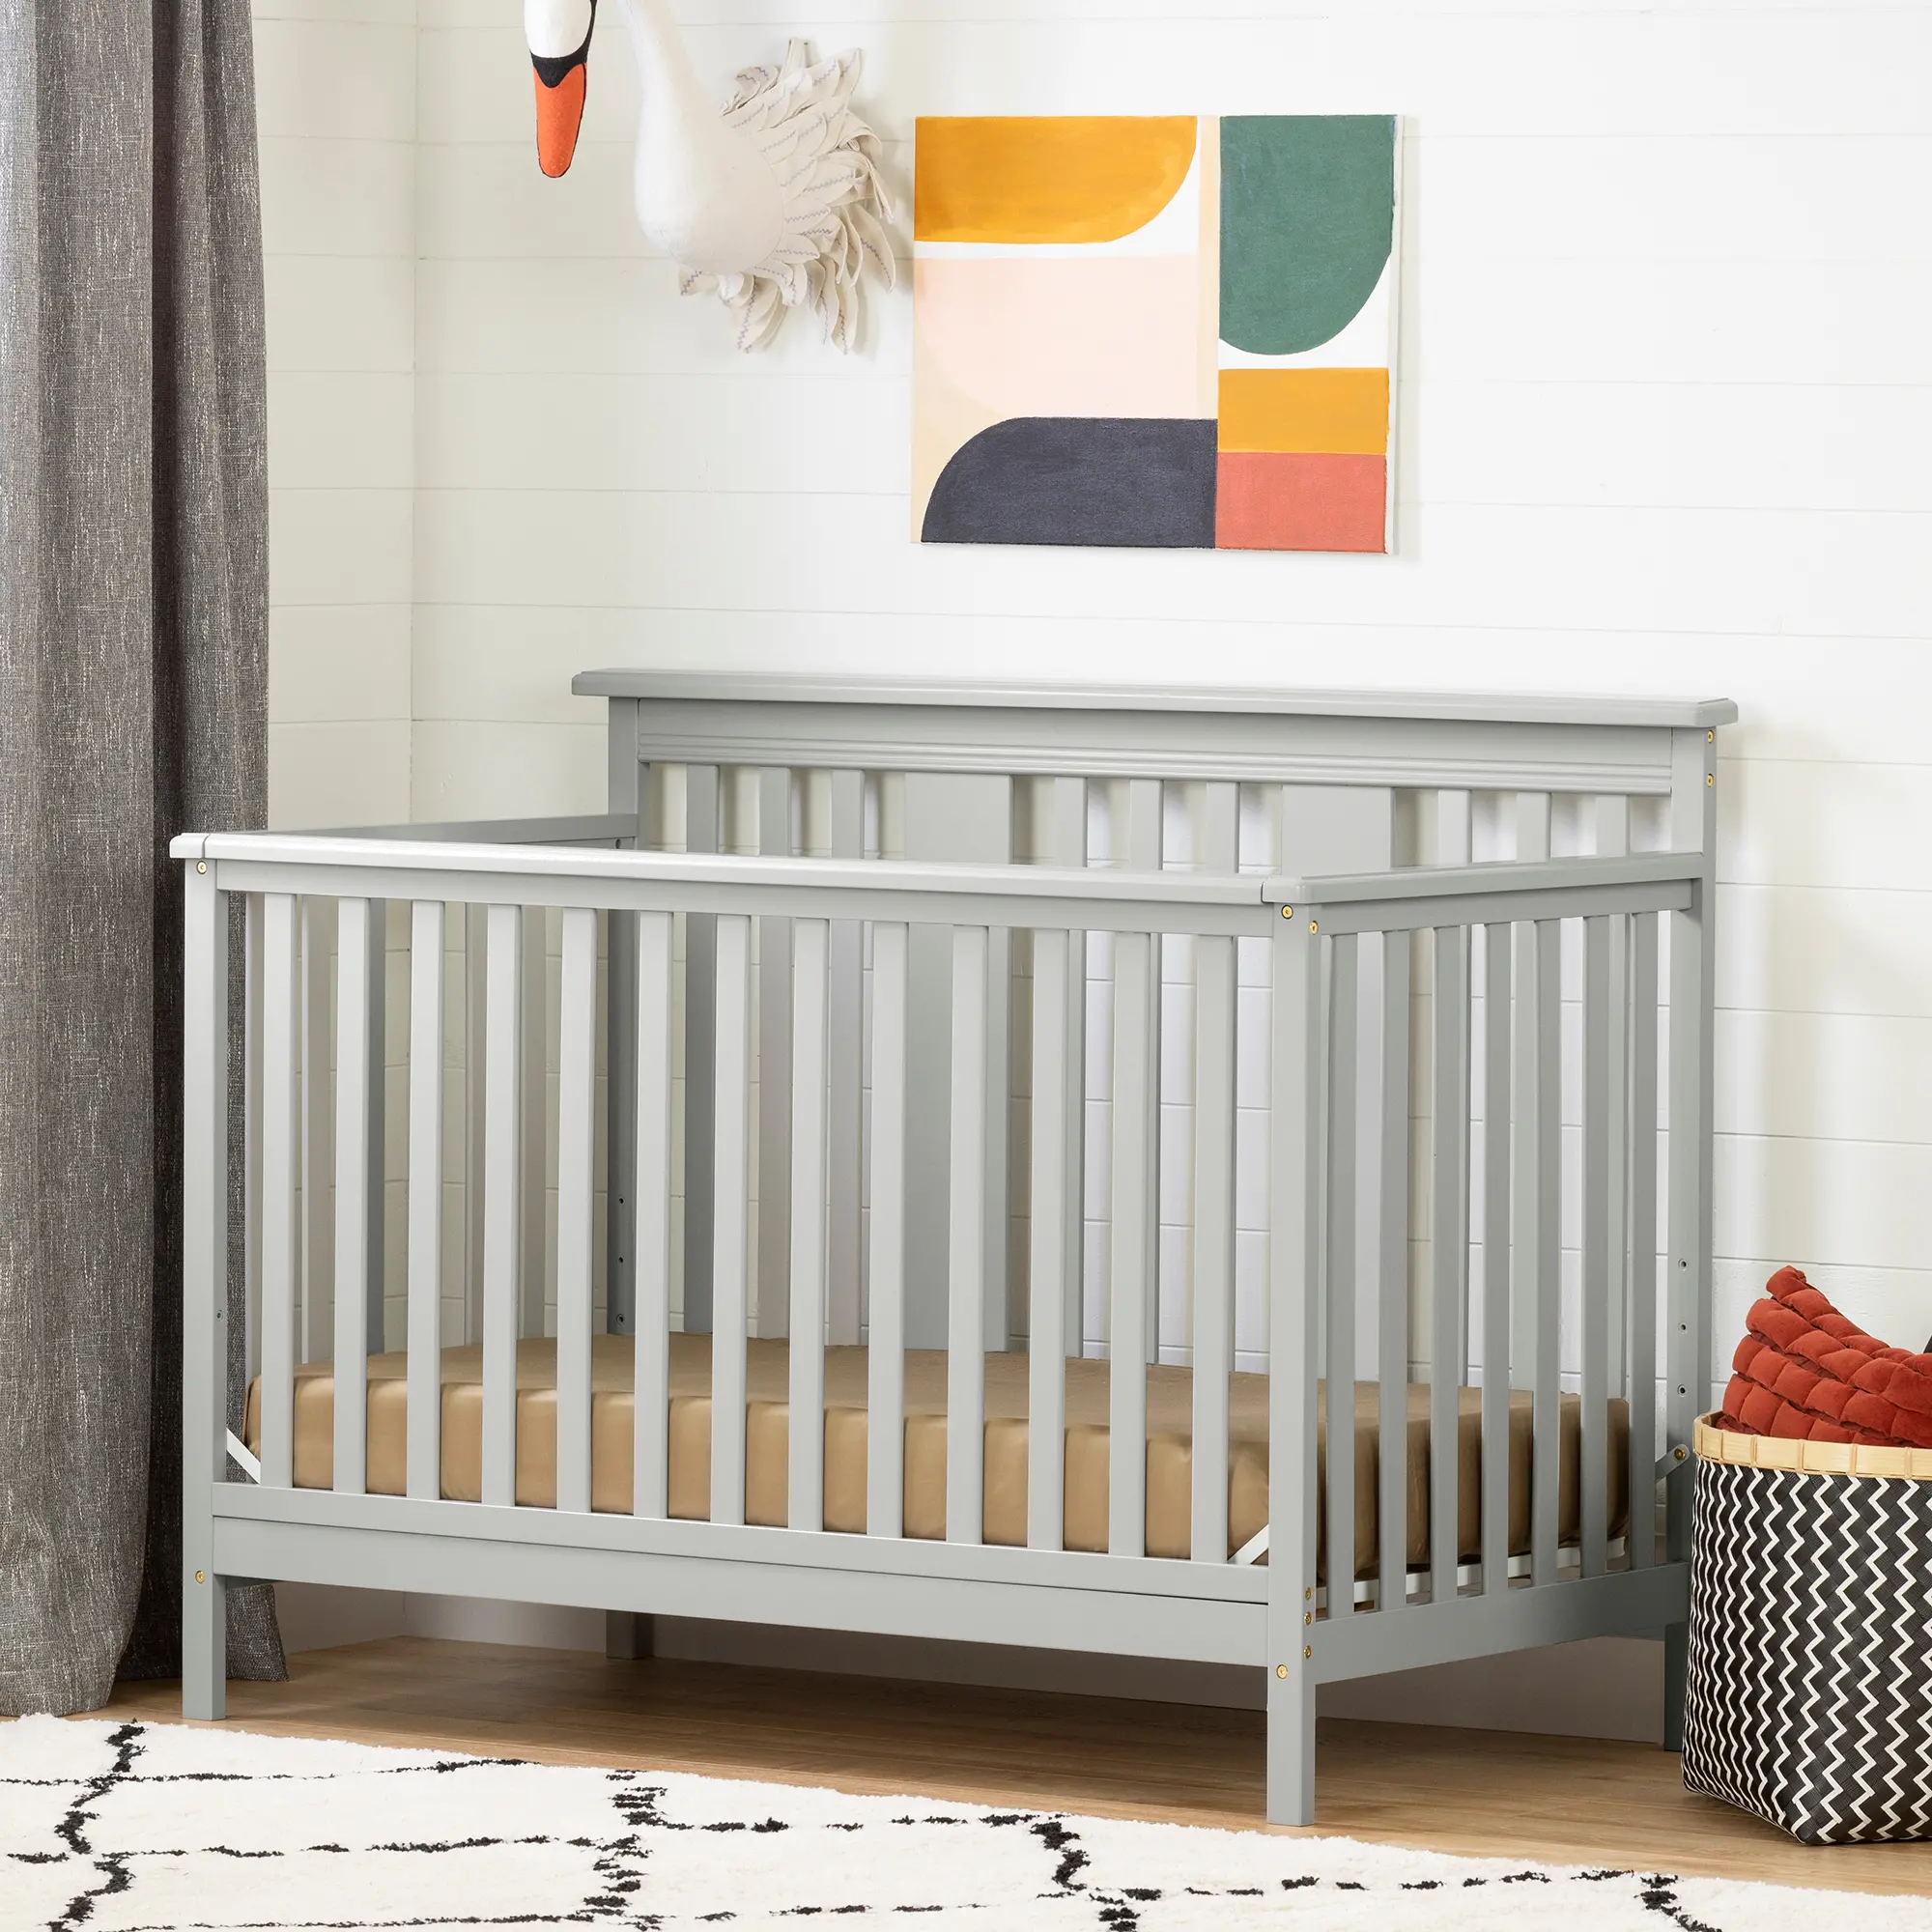 Cotton Candy Gray Crib with Toddler Rail - South Shore